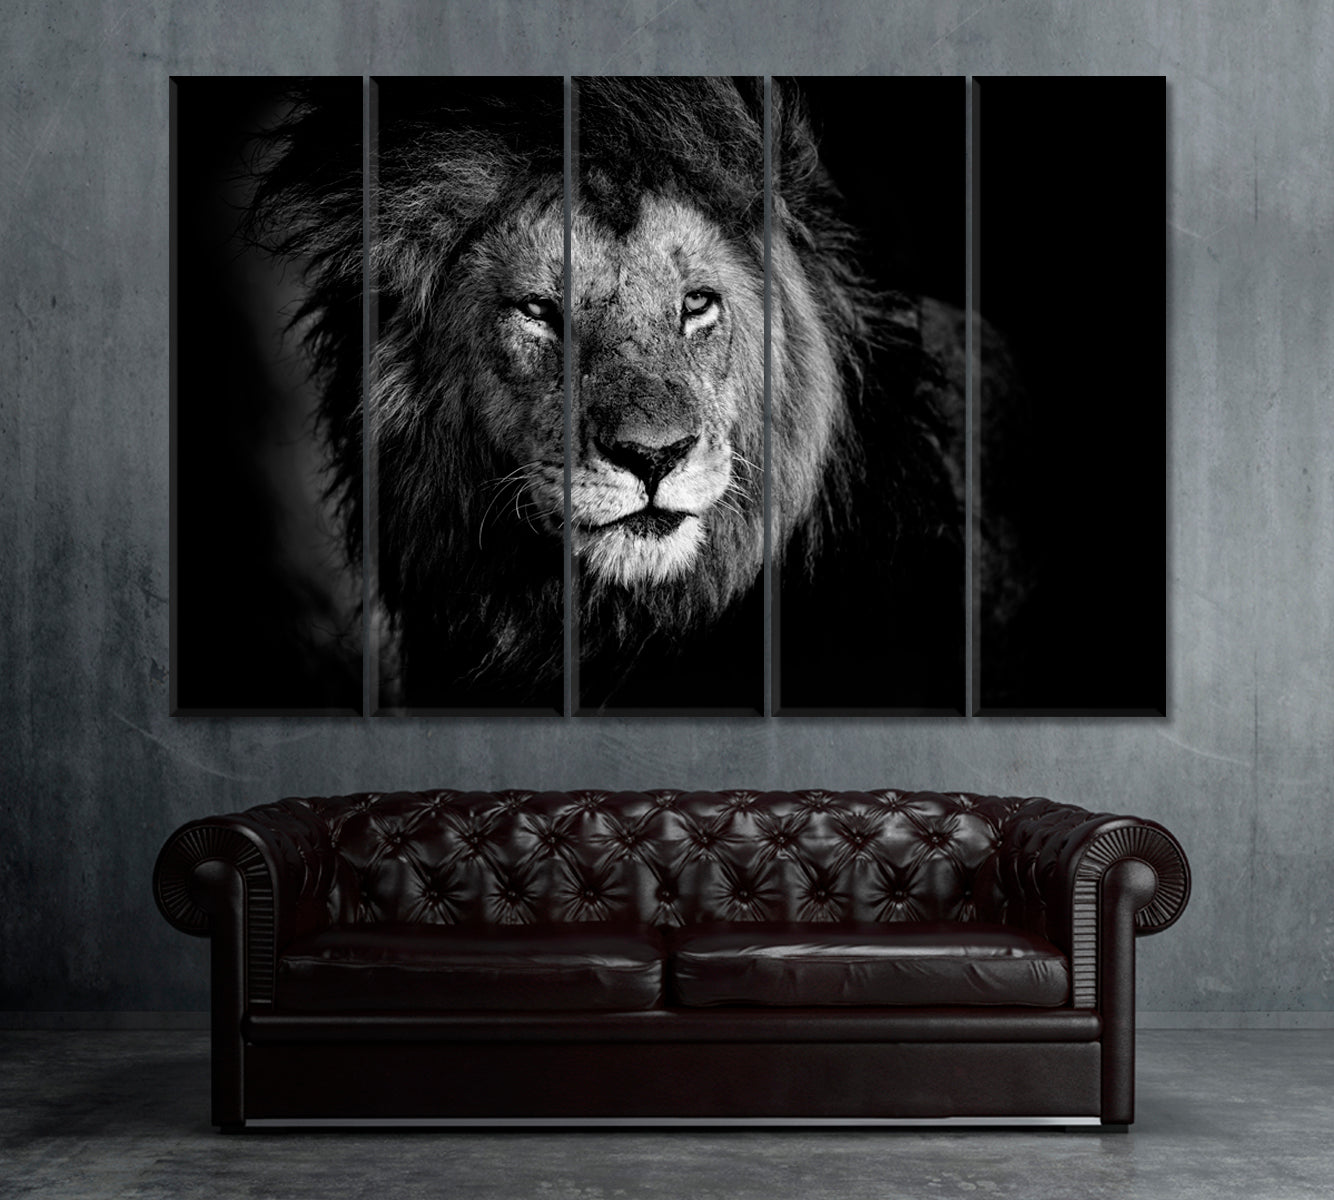 Beautiful Lion in Black and White Canvas Print ArtLexy 5 Panels 36"x24" inches 